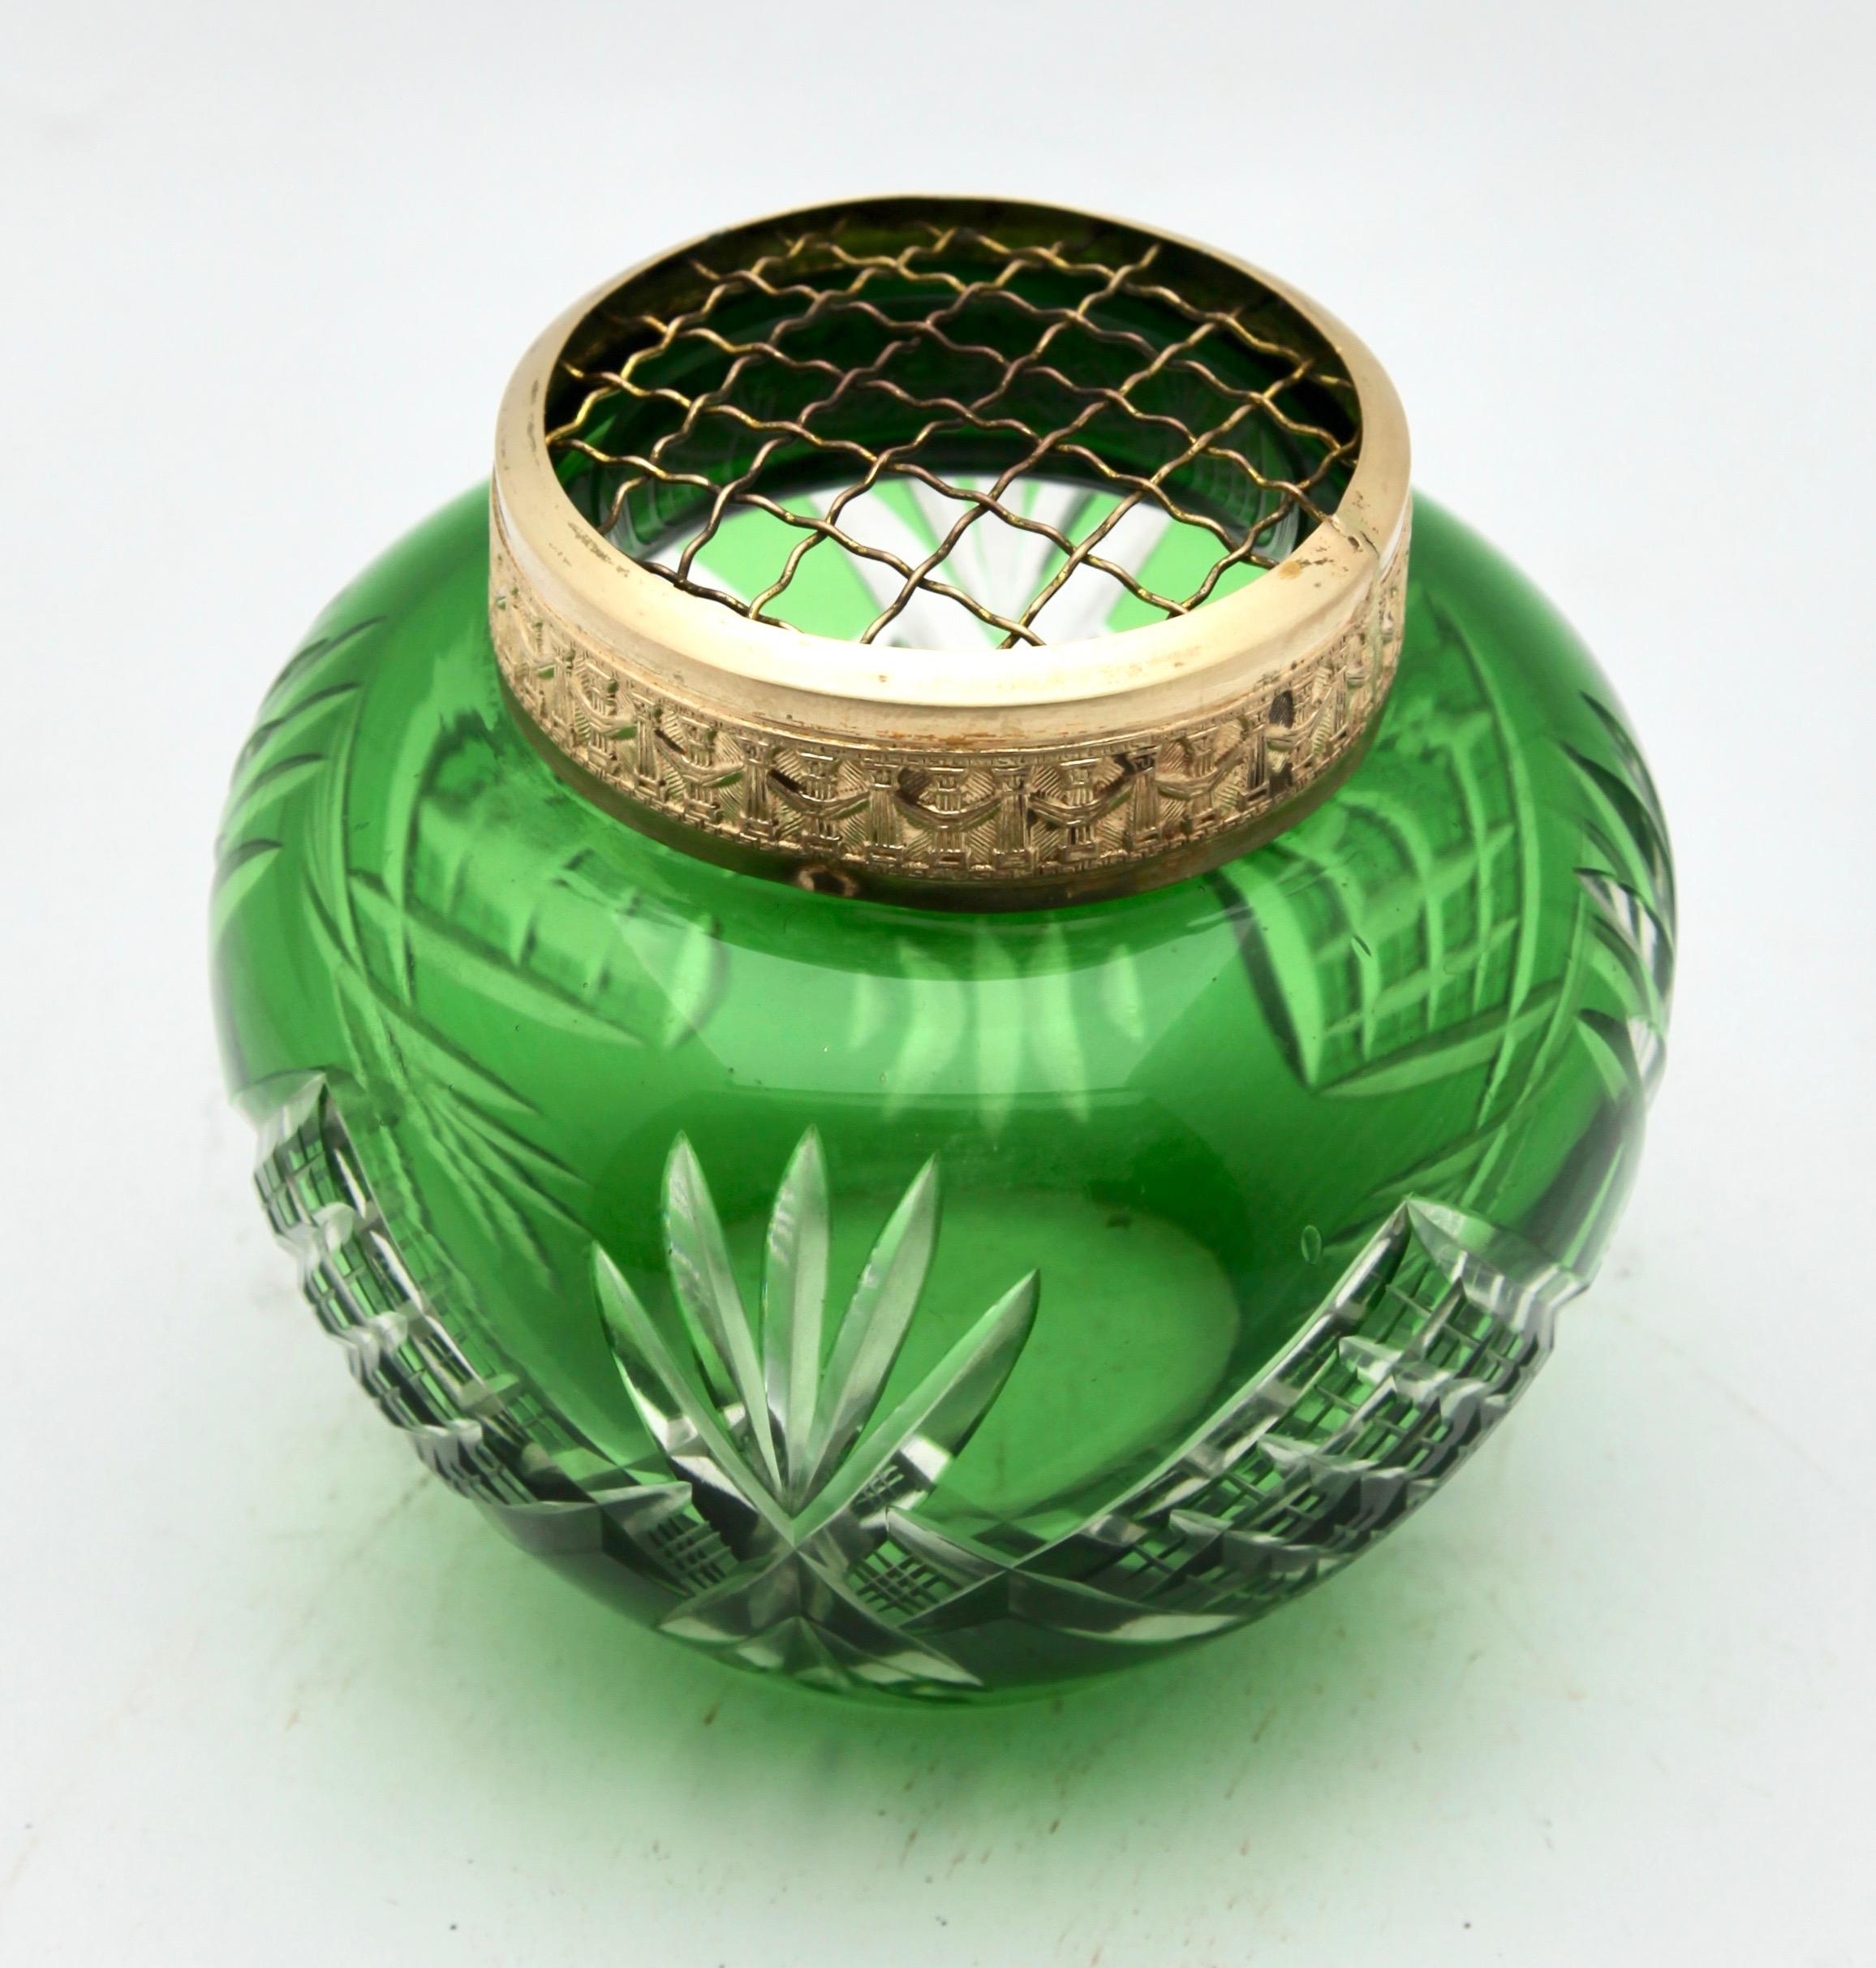 Vibrant, meadow-green cased-crystal glass vase in the Bohemian style with cut-to-clear decoration of palms and trellis. This design for vases is often called 'Pique fleurs' or 'rose-bowl' and is supplied with a fitted metal grille to support stems